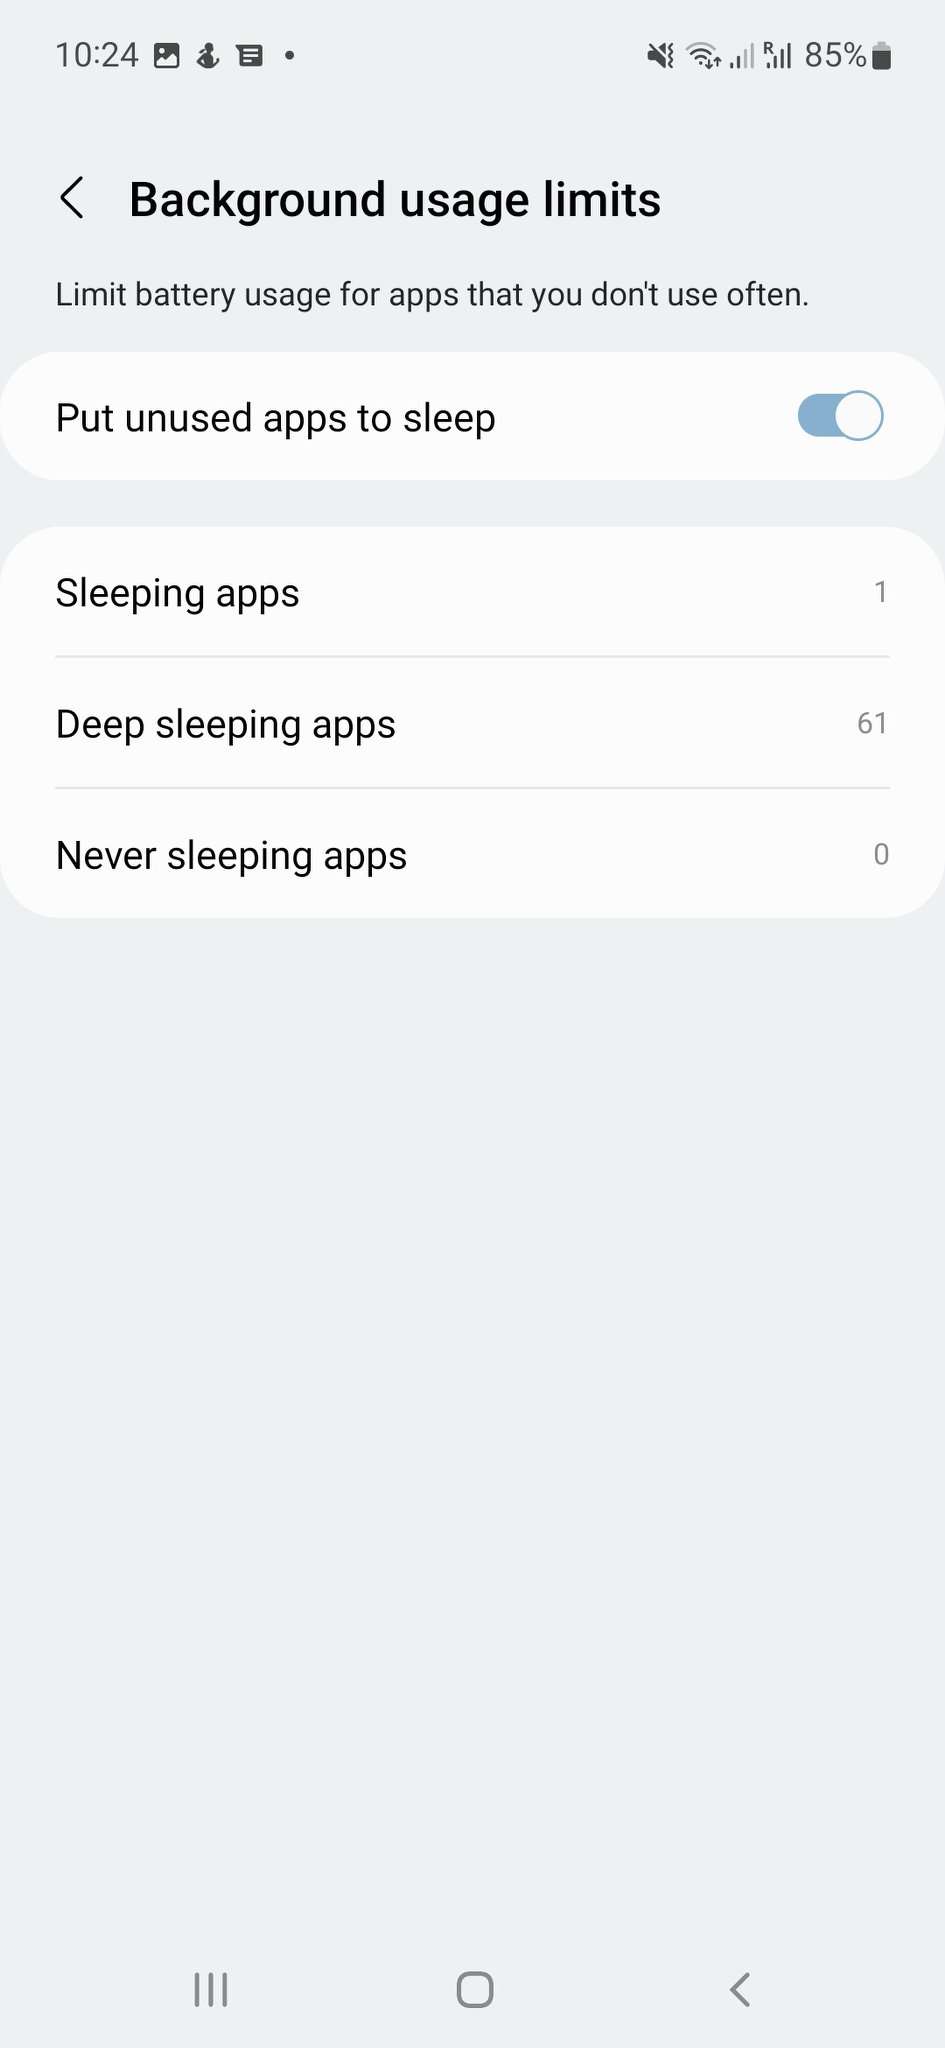 Steps to fix missed Skype notifications on Android device, including adding Skype to Never sleeping apps in battery settings or allowed apps in security settings on Huawei, Xiaomi, and Samsung devices.